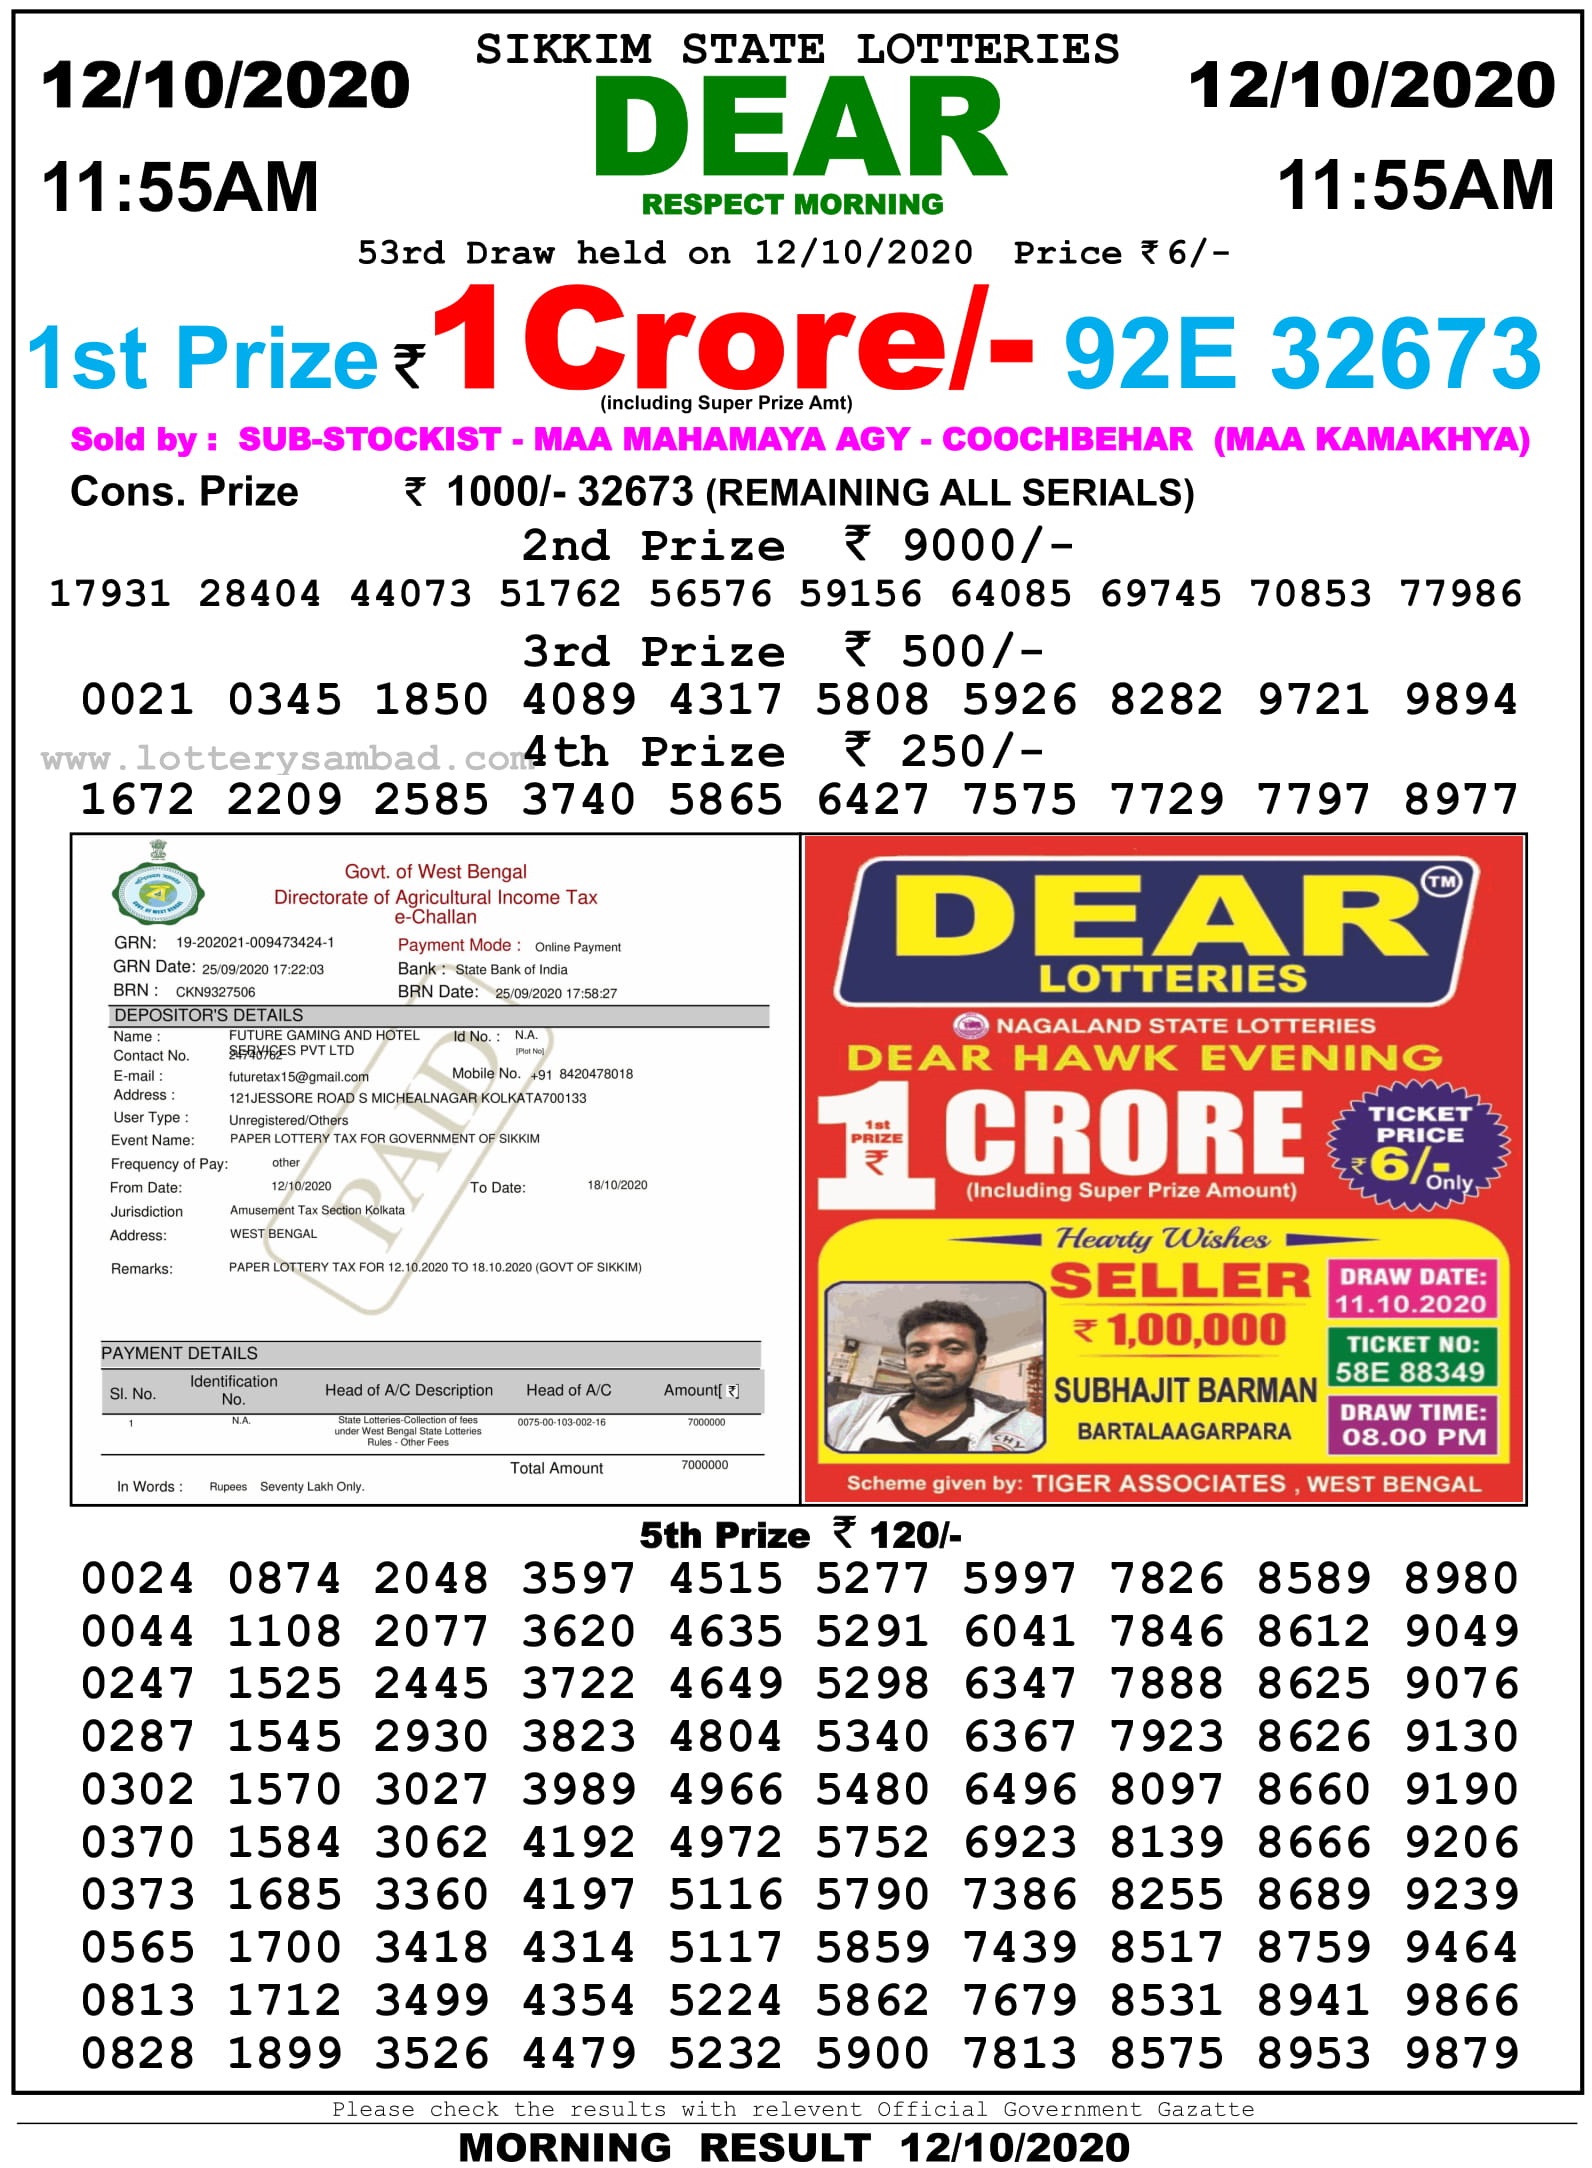 Sikkim State Lottery Result 11.55 AM 12.10.2020